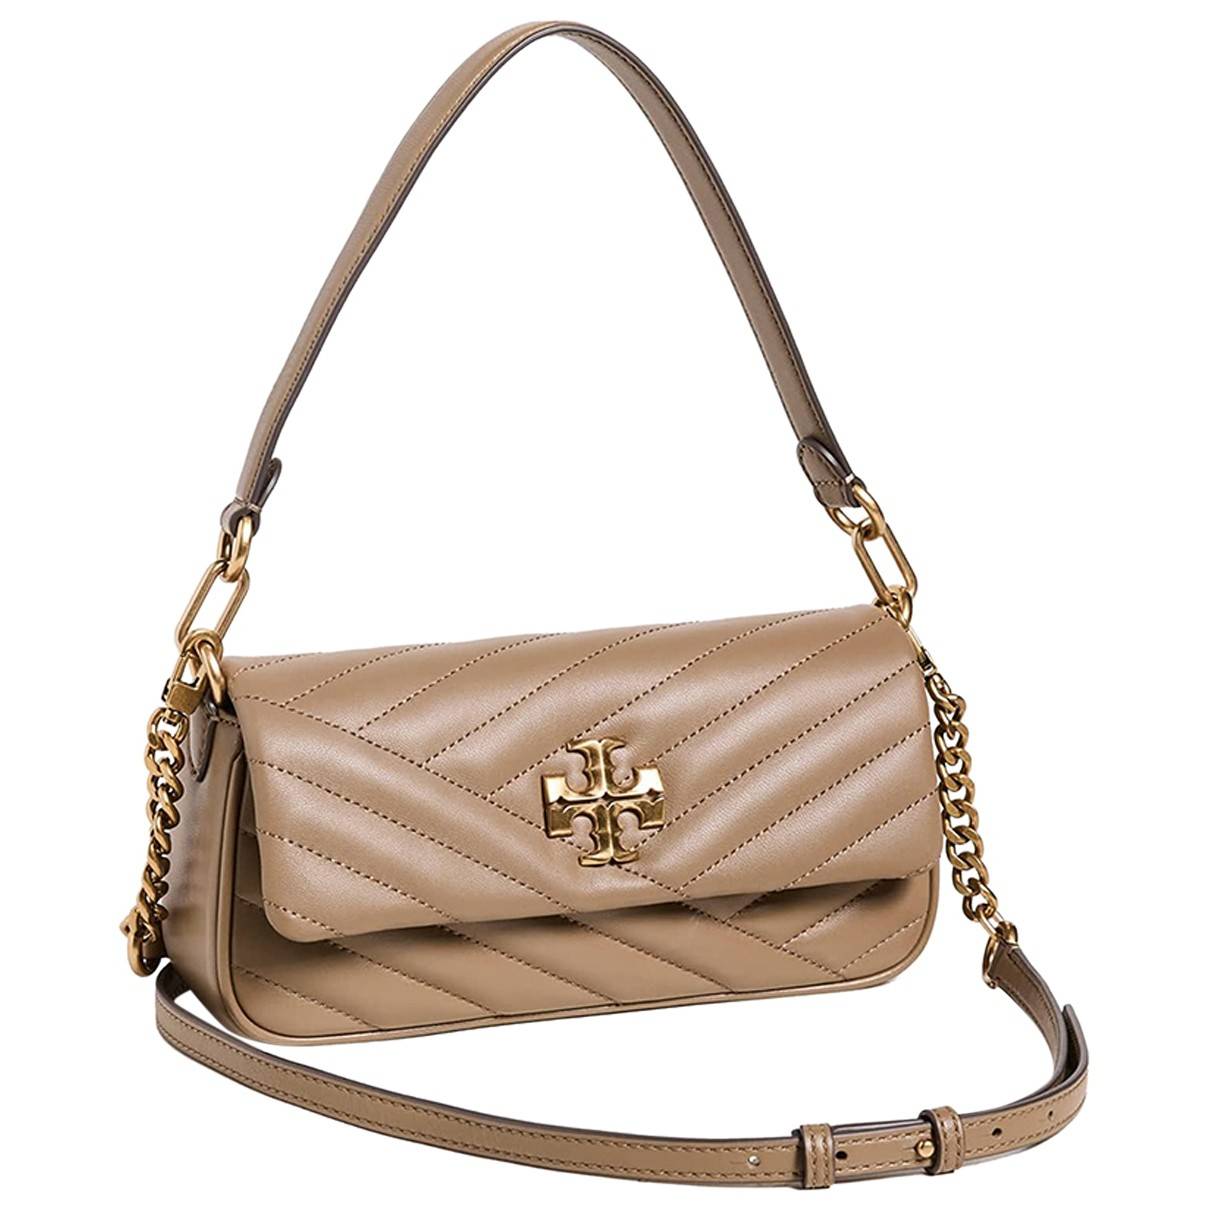 Leather handbag Tory Burch Brown in Leather - 26230170